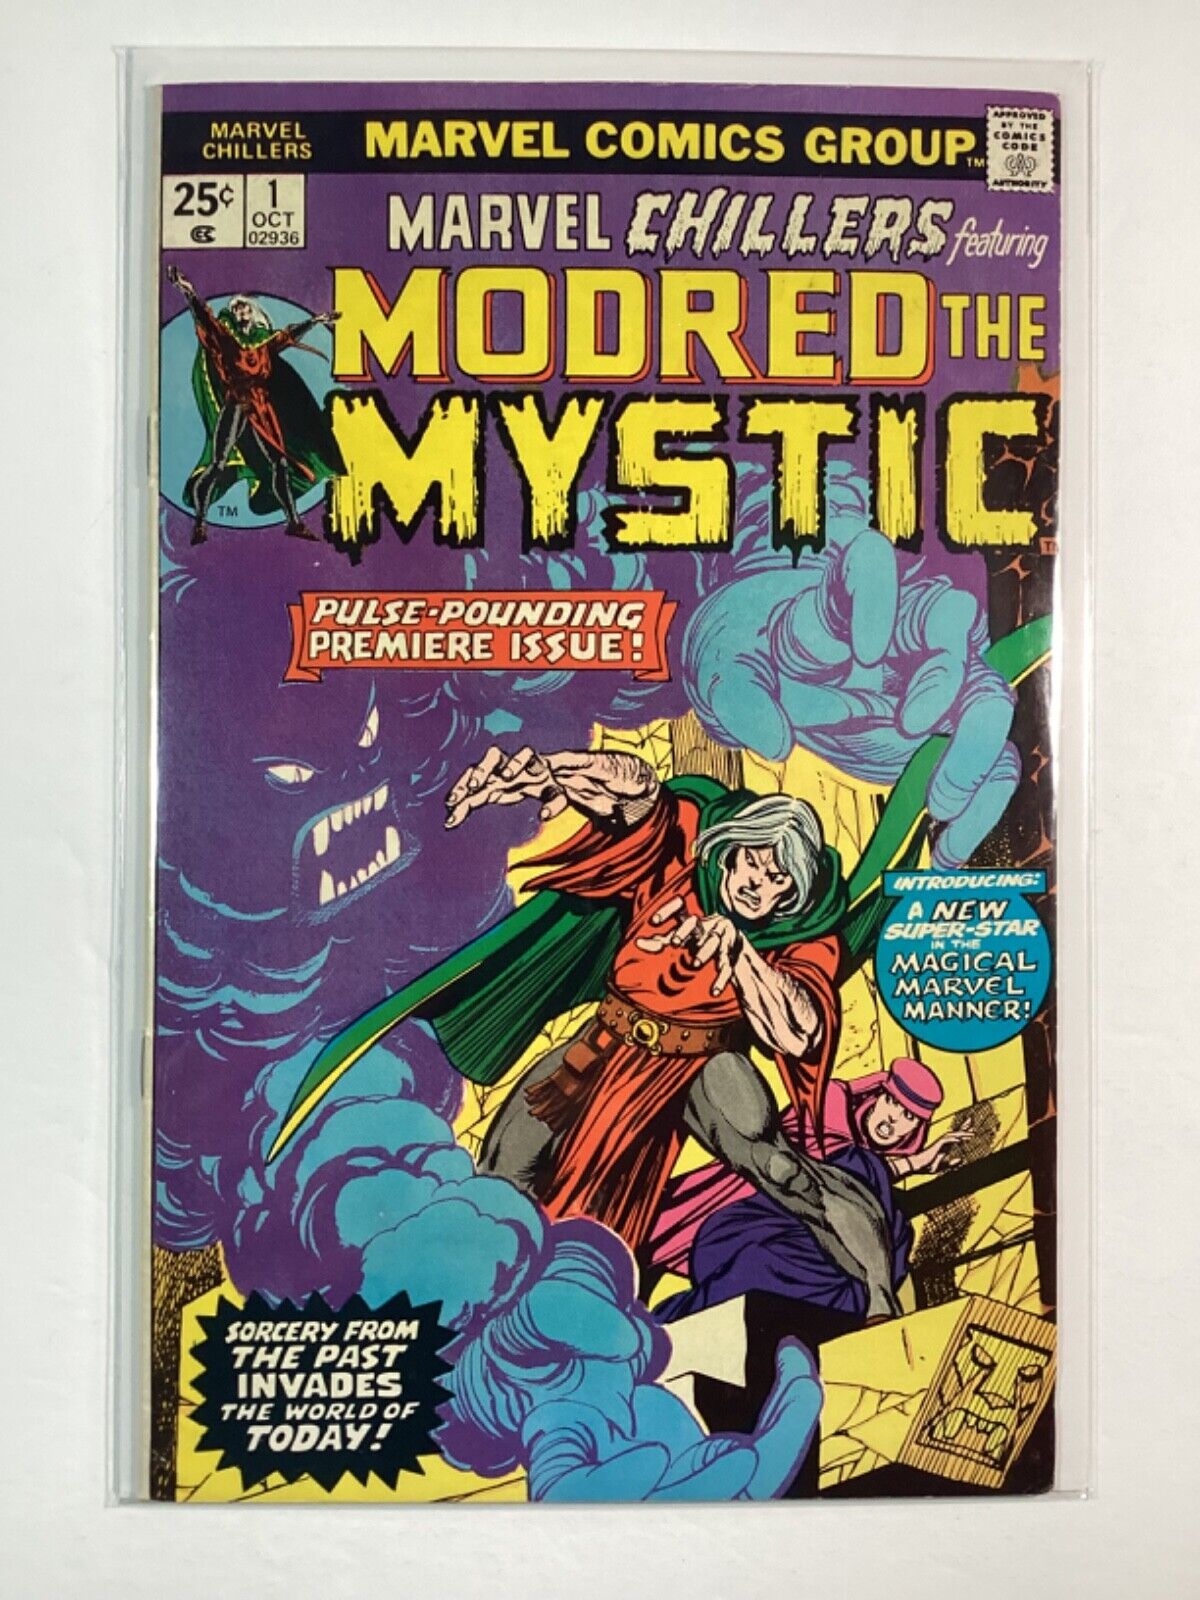 MARVEL CHILLERS 1975 #1 FN+ 6.5🥇1st APP. OF MODRED THE MYSTIC & THE OTHER🥇